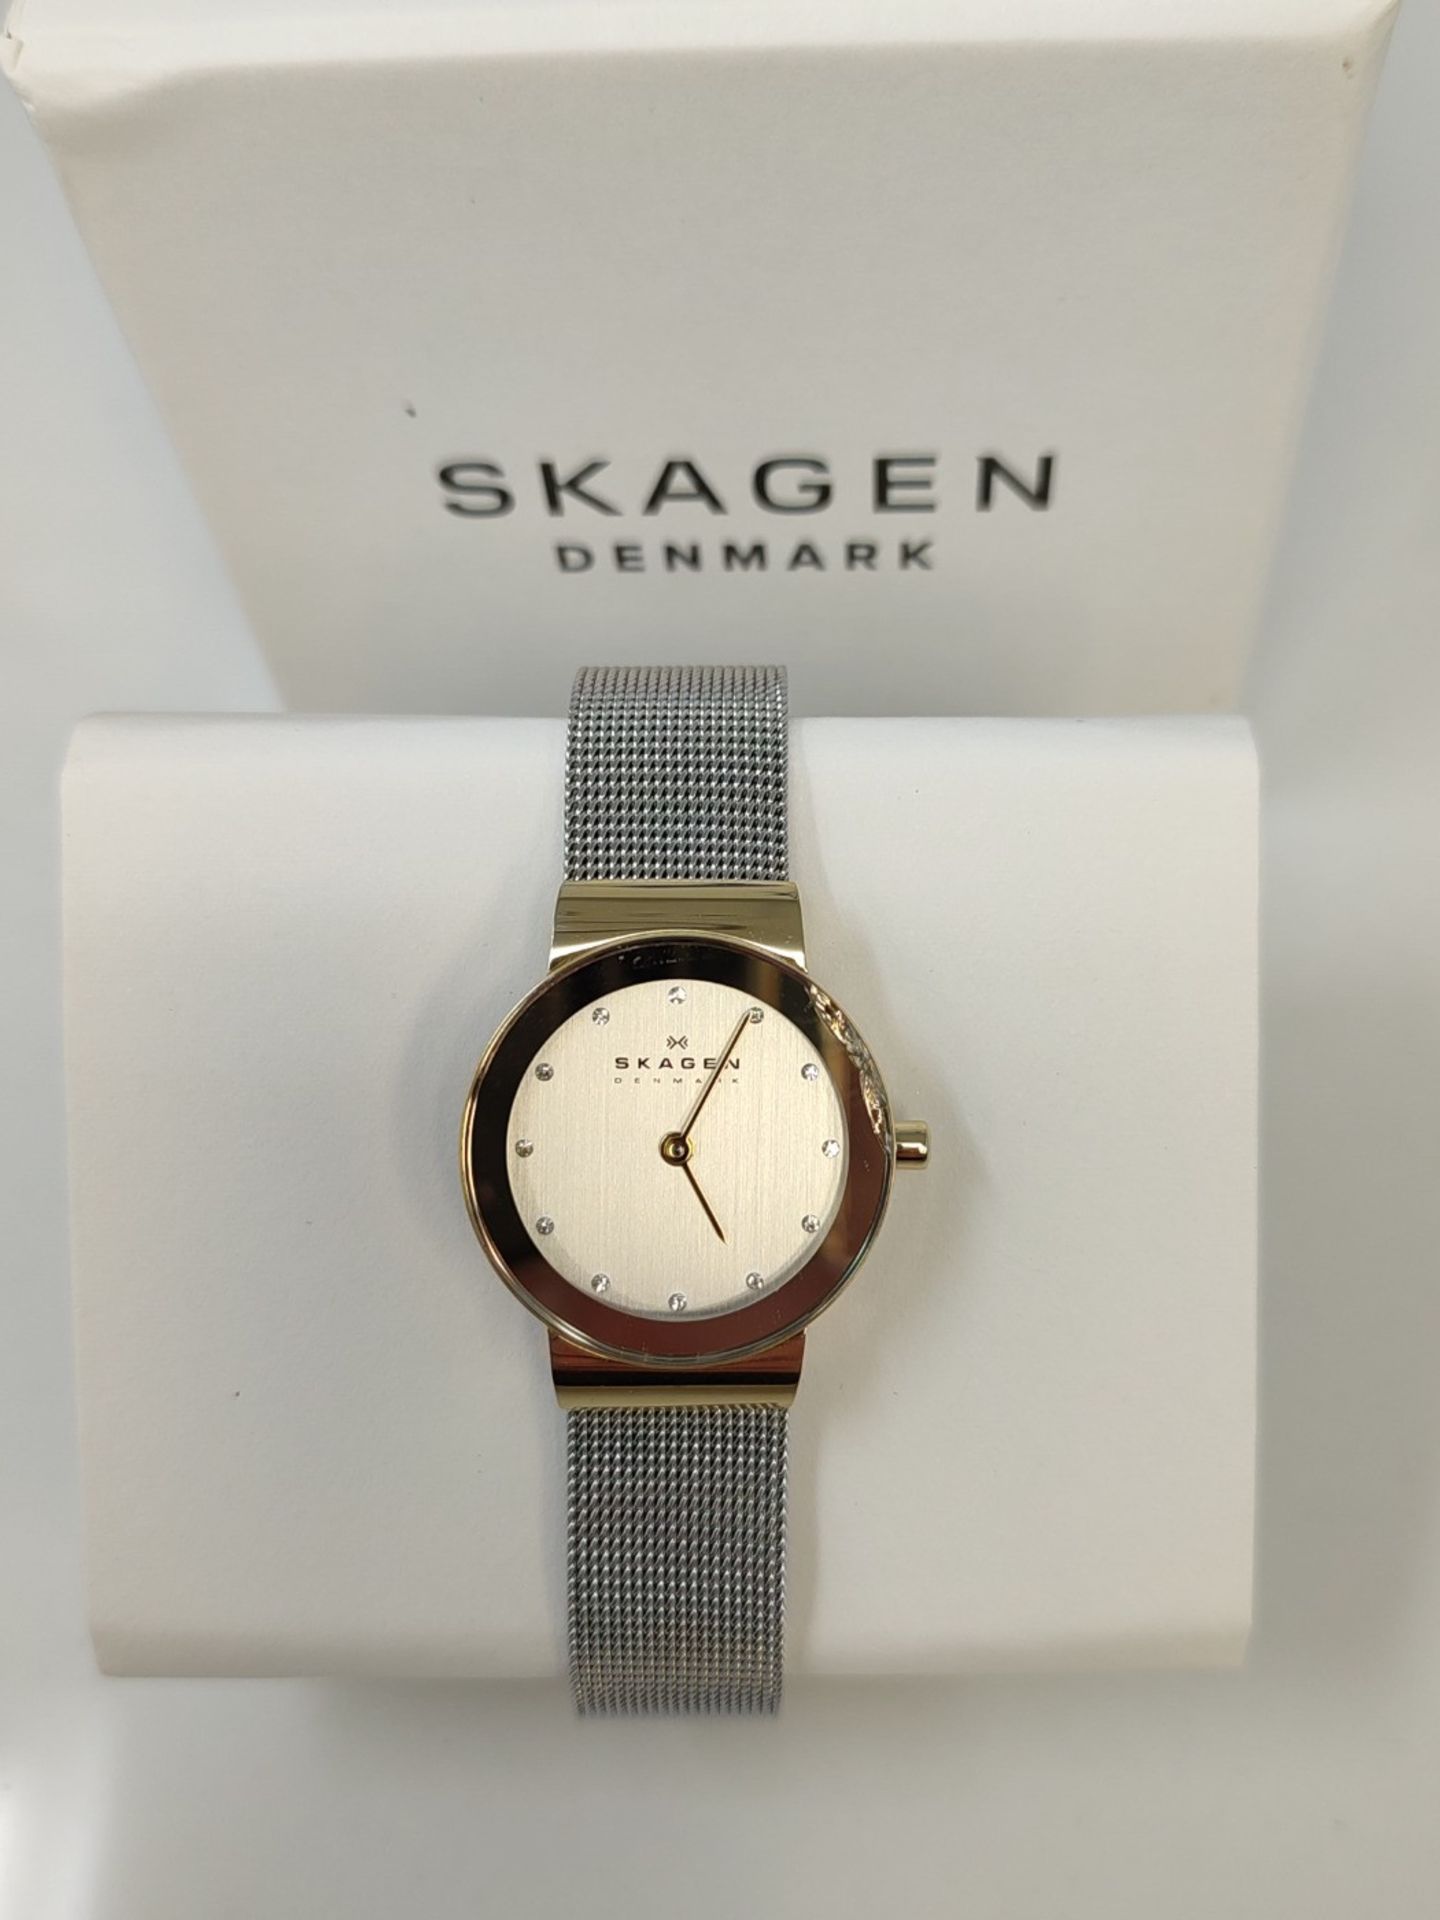 RRP £53.00 Skagen women's watch Freja Lille, two-hand movement, 26mm gold stainless steel case wi - Image 2 of 2